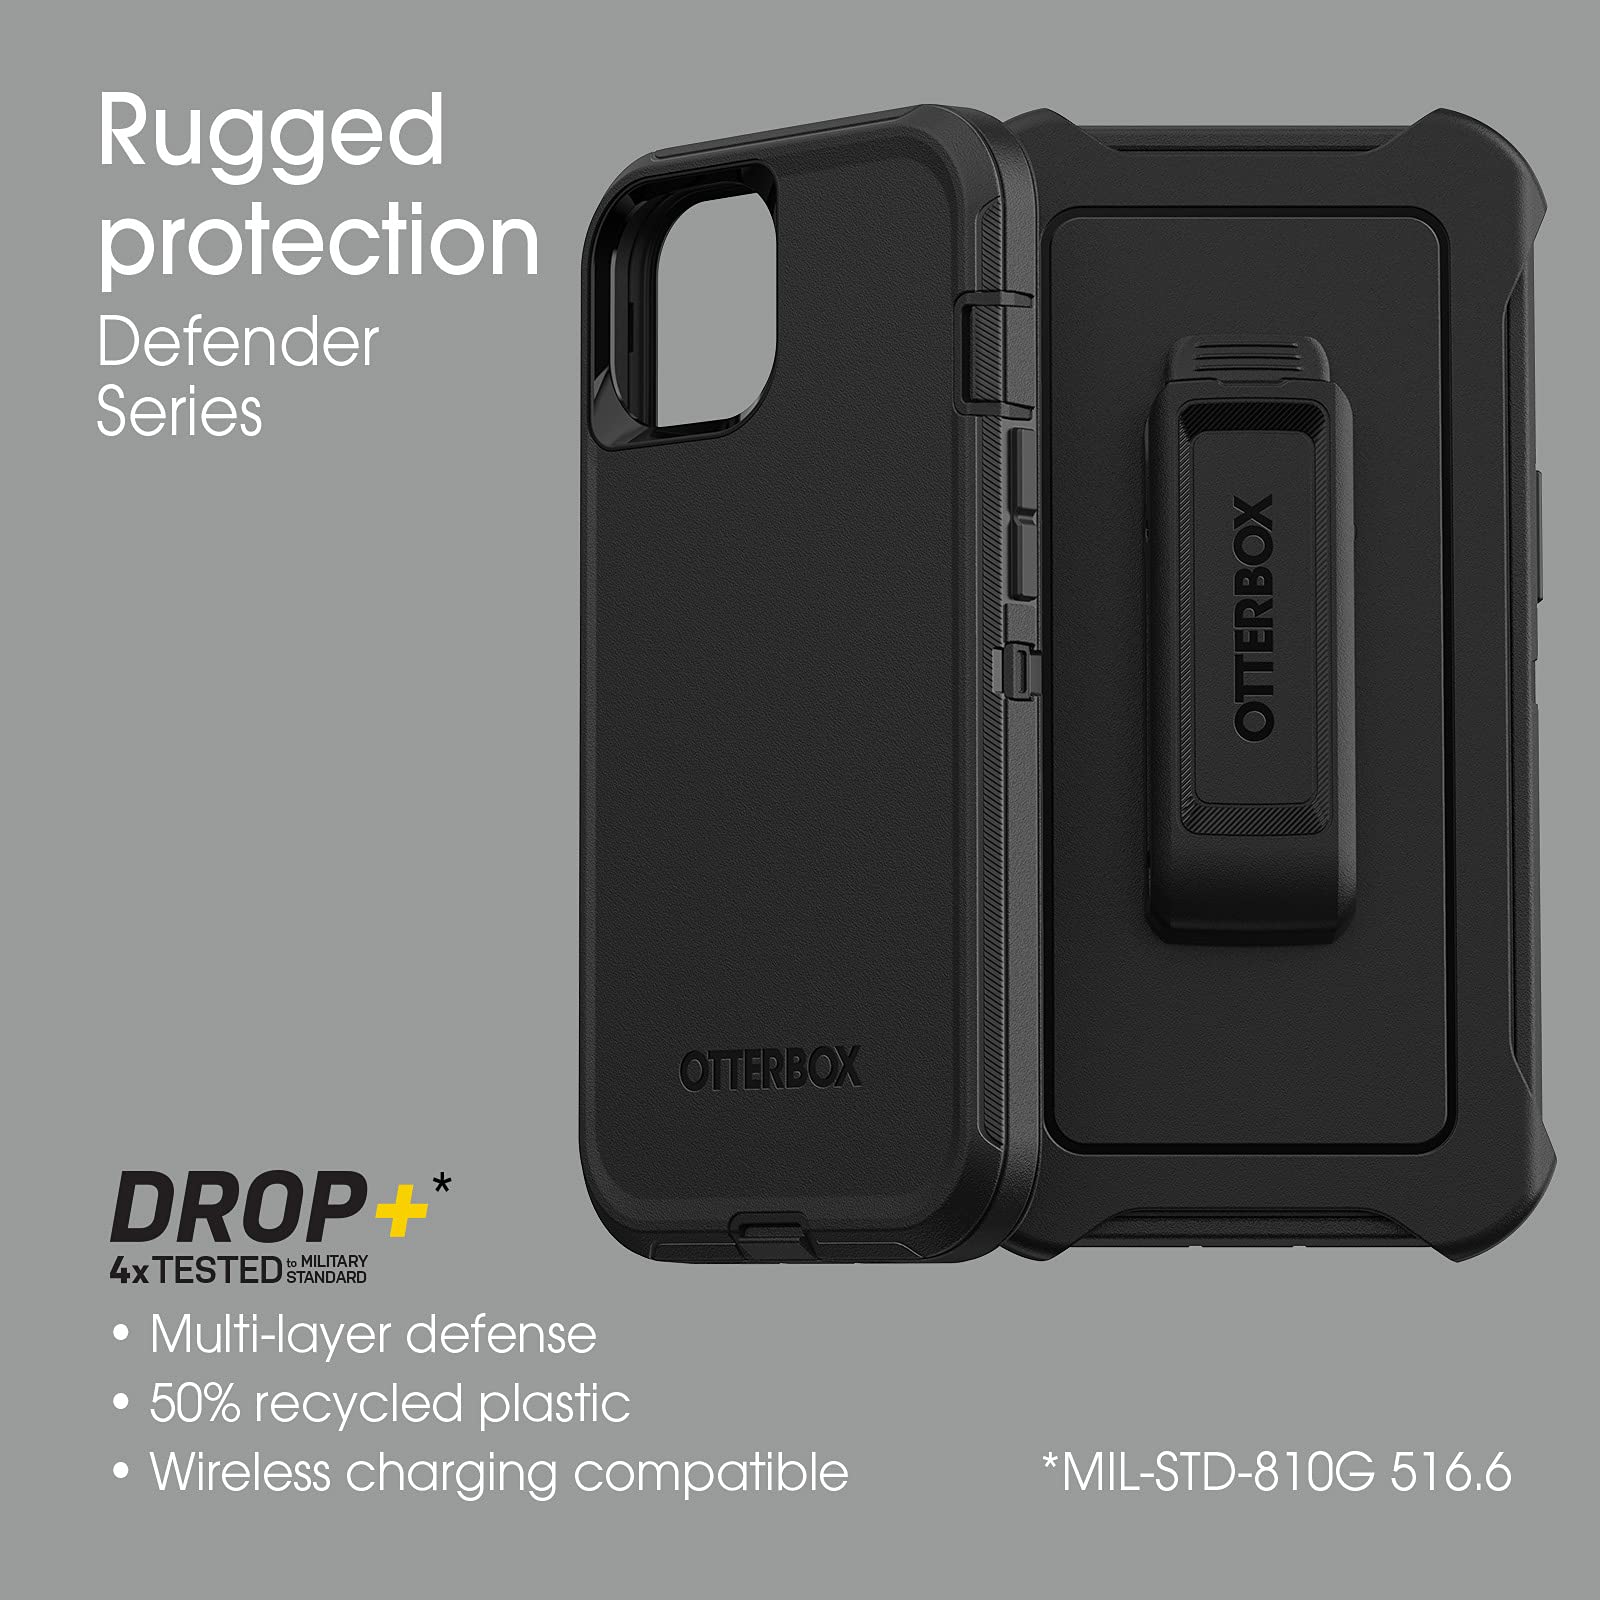 OtterBox iPhone 13 (ONLY) Defender Series Case - BLACK/REALTREE (CAMO), rugged & durable, with port protection, includes holster clip kickstand